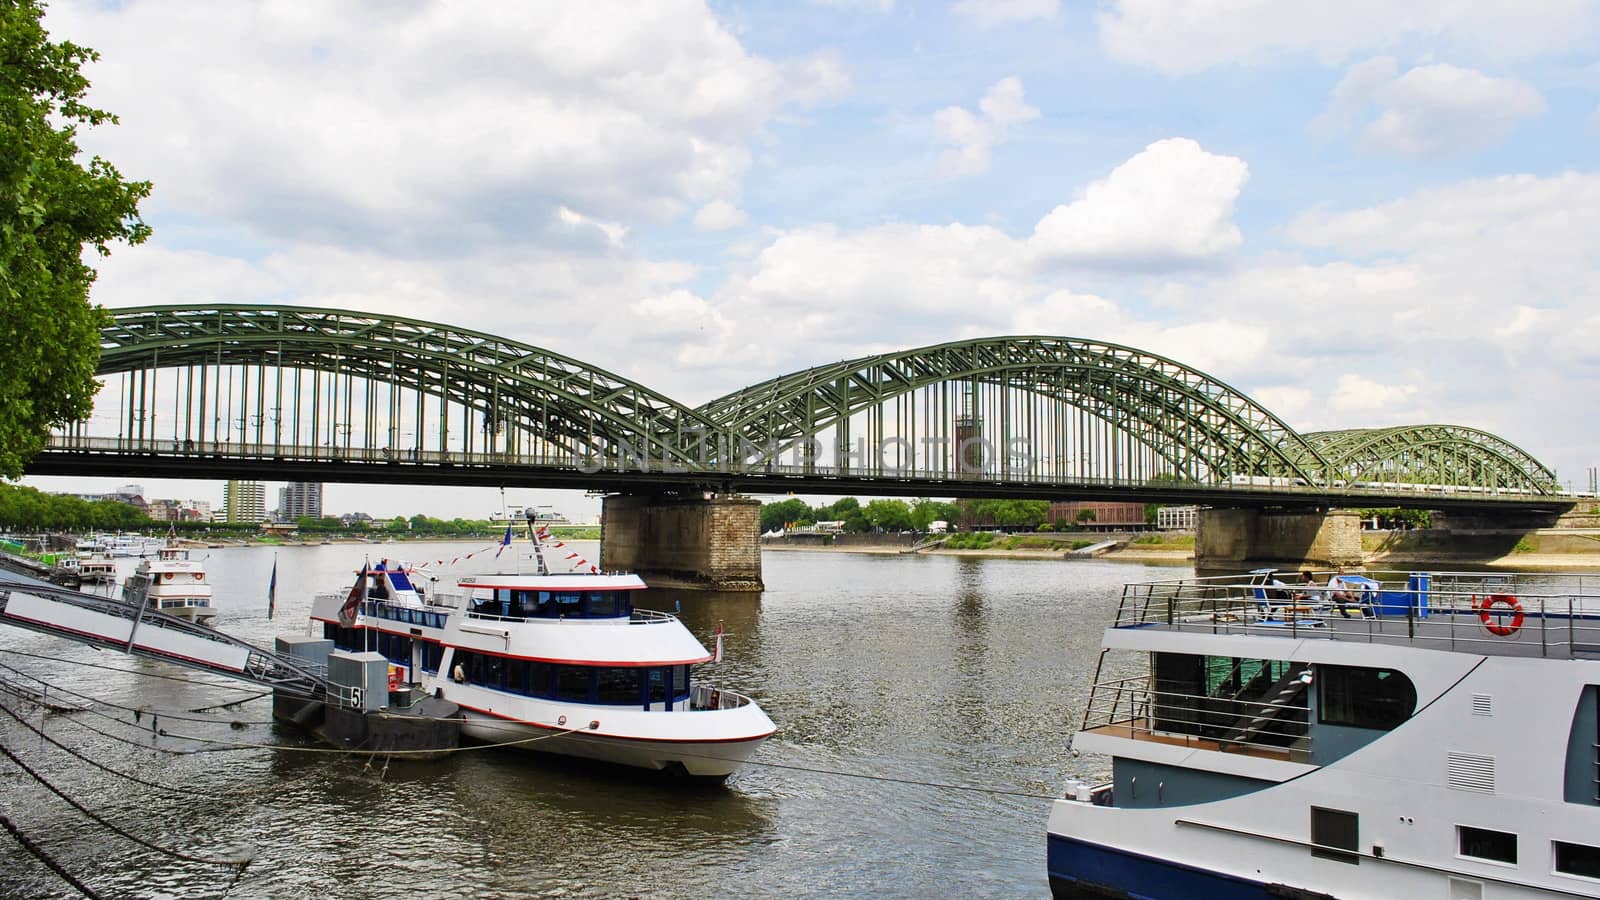 The famous bridge of lovers across the Rhine river in the city of Cologne